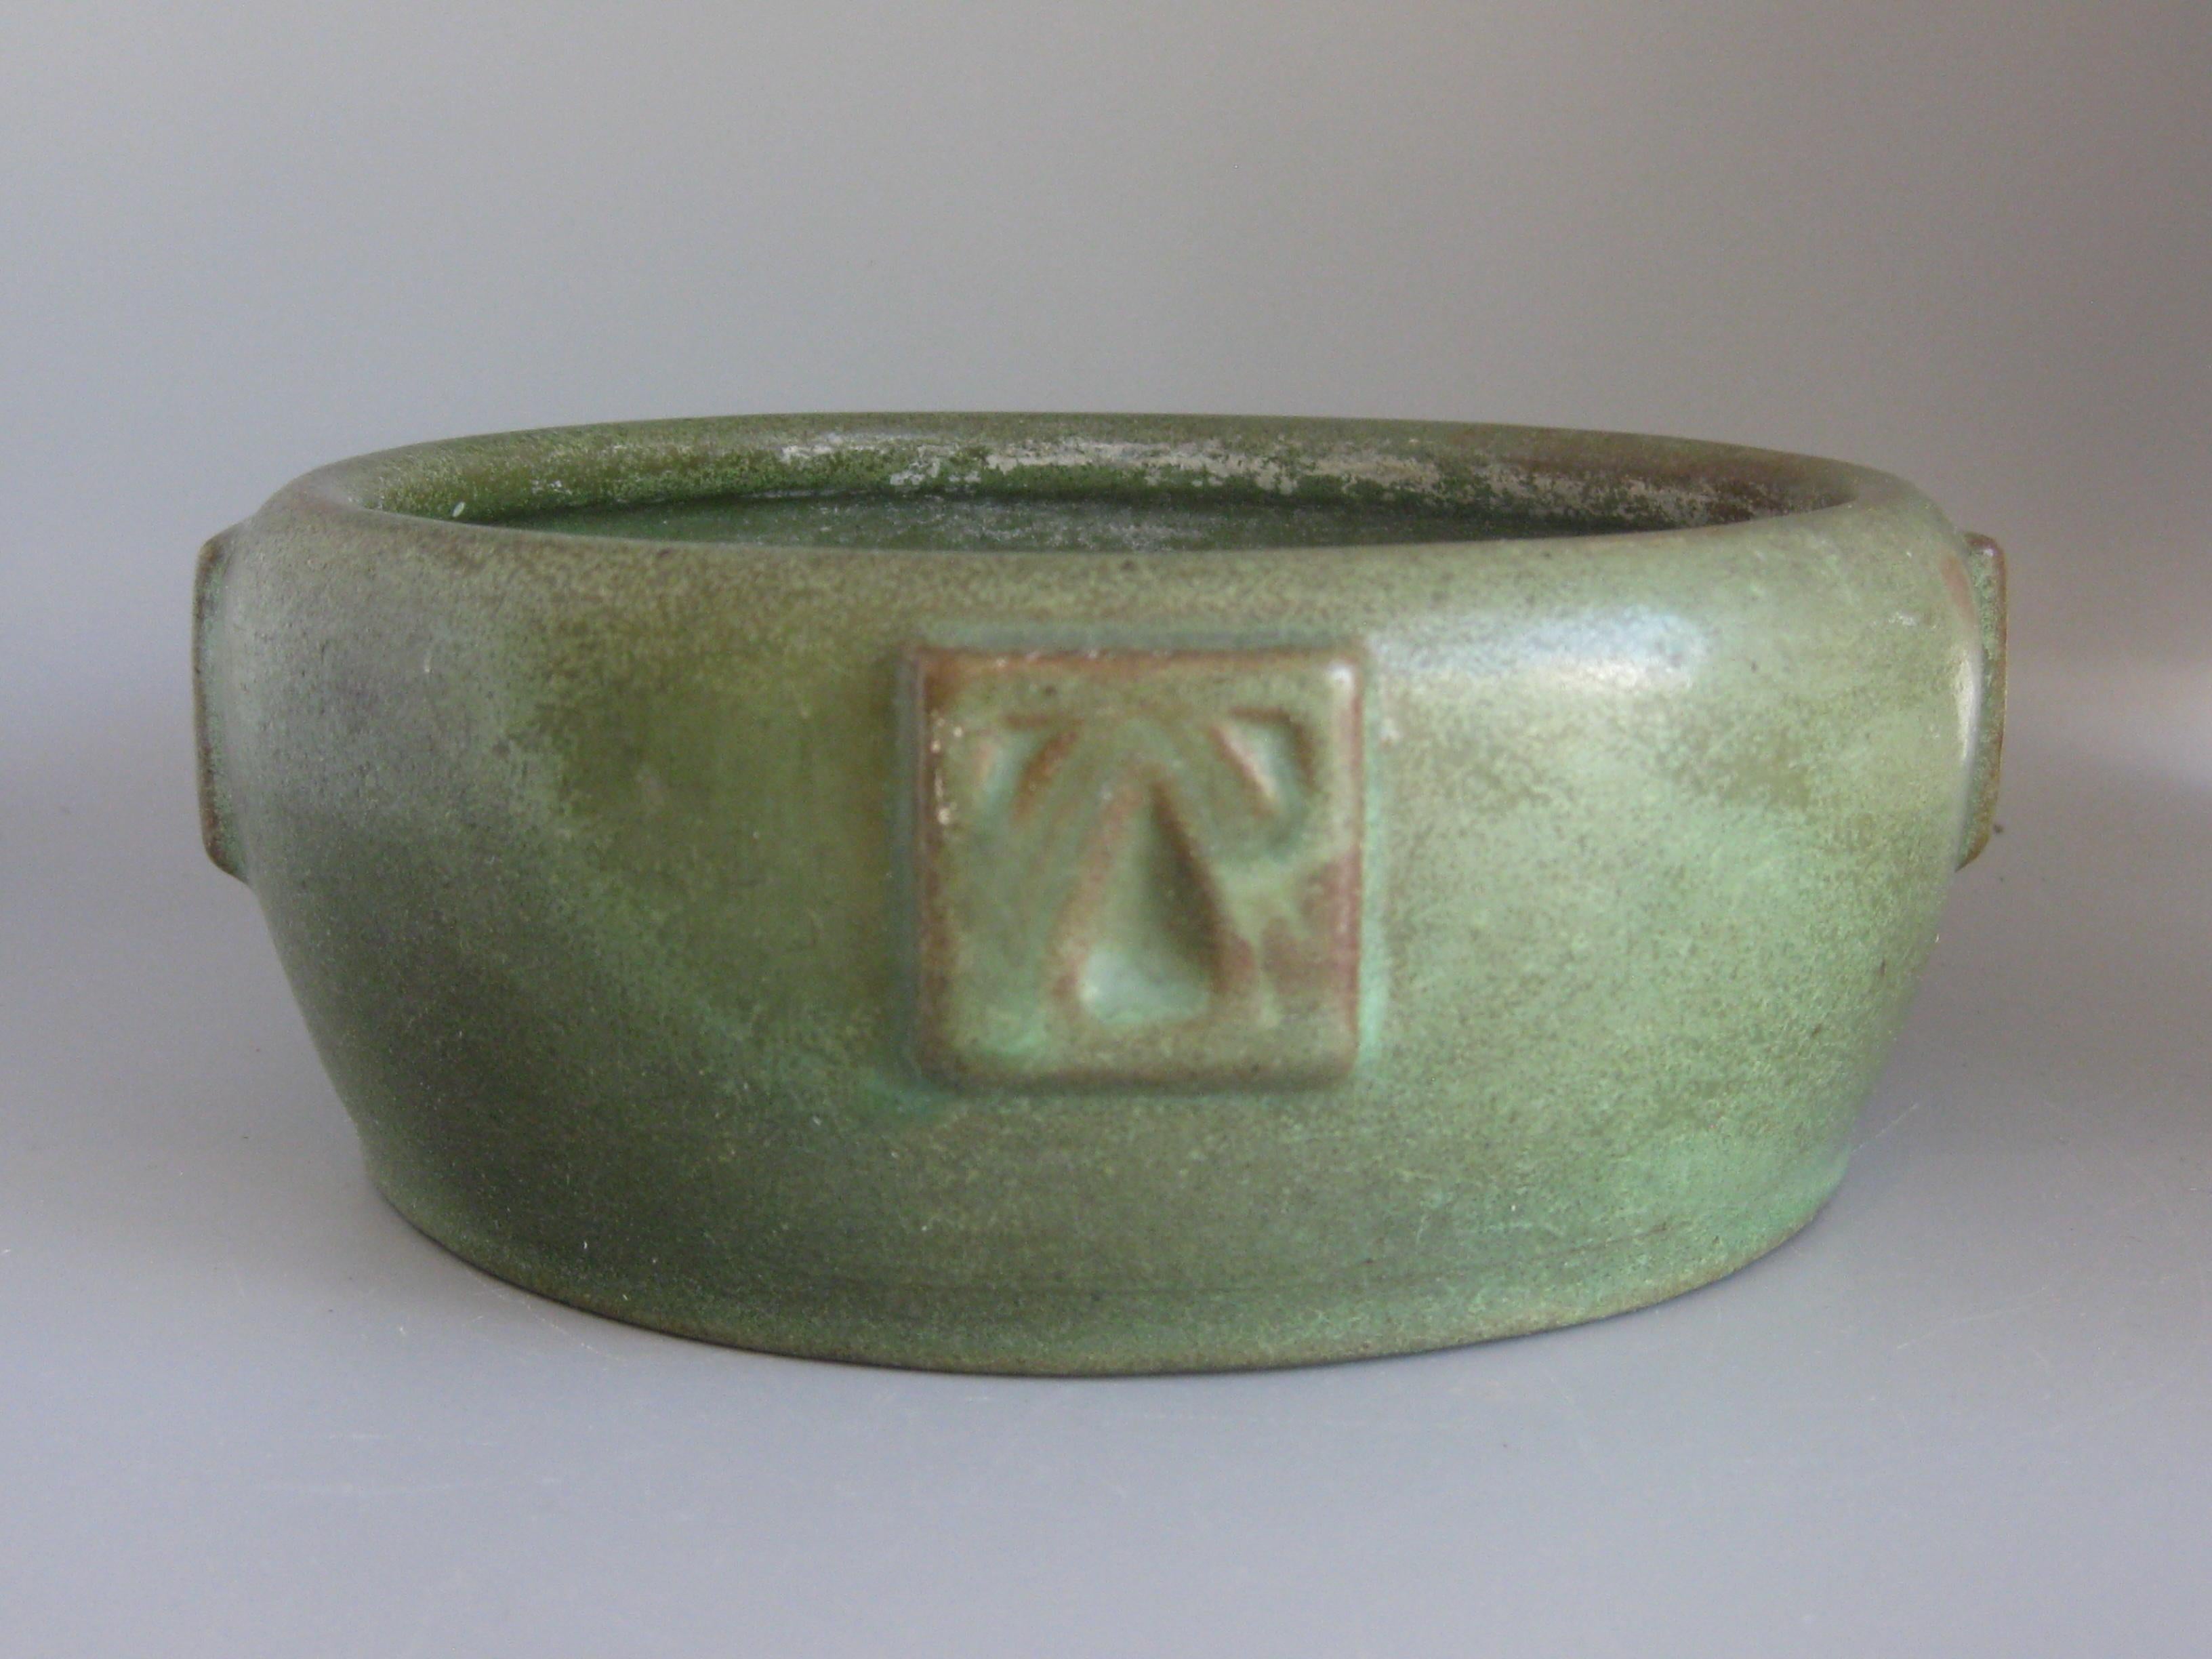 Wonderful Arts & Crafts green matte art pottery bowl made by Peters & Reed in Zanesville, Ohio. Dates from the early 1900s. Wonderful color and shape. Has decorations on the sides. Would look great in any Arts & Crafts decor. In very nice original